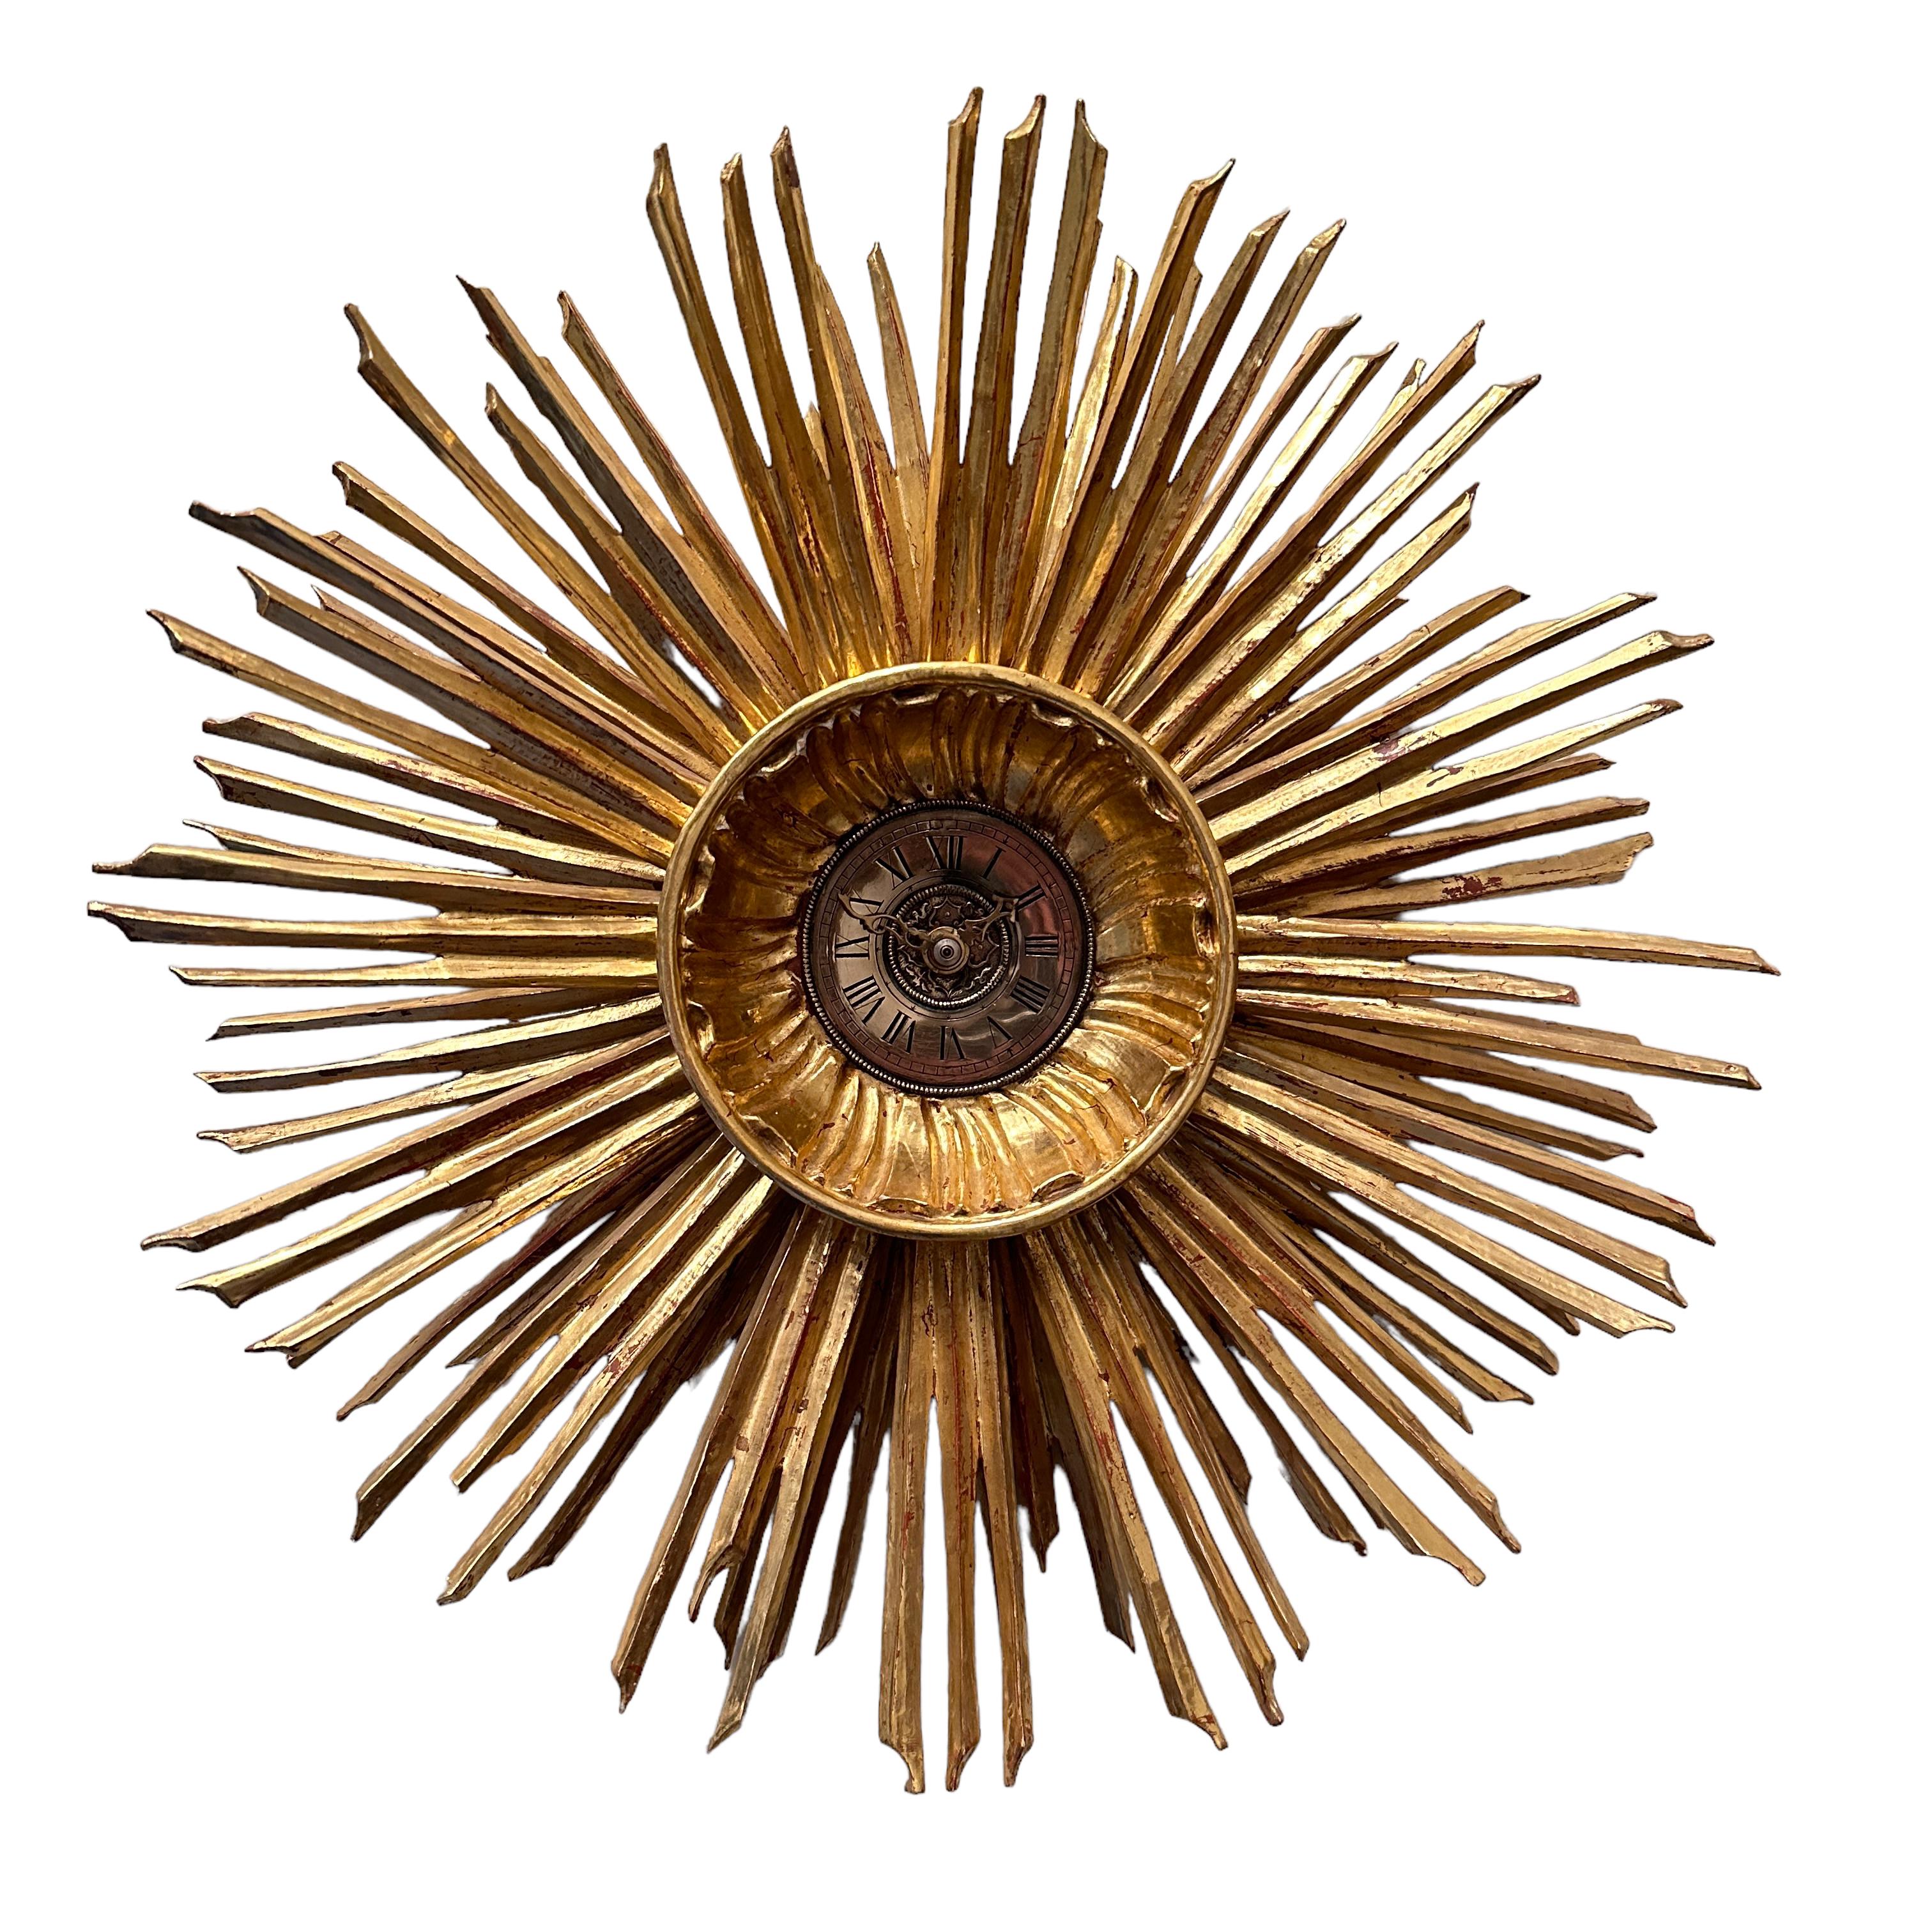 Stunning original 1970s sunburst starburst wall clock. Featuring beautiful wood and gold plated sunburst surrounding illustrating perfectly the mood of the decade. The clock has the particularity of having a open face so hands can be accessed from